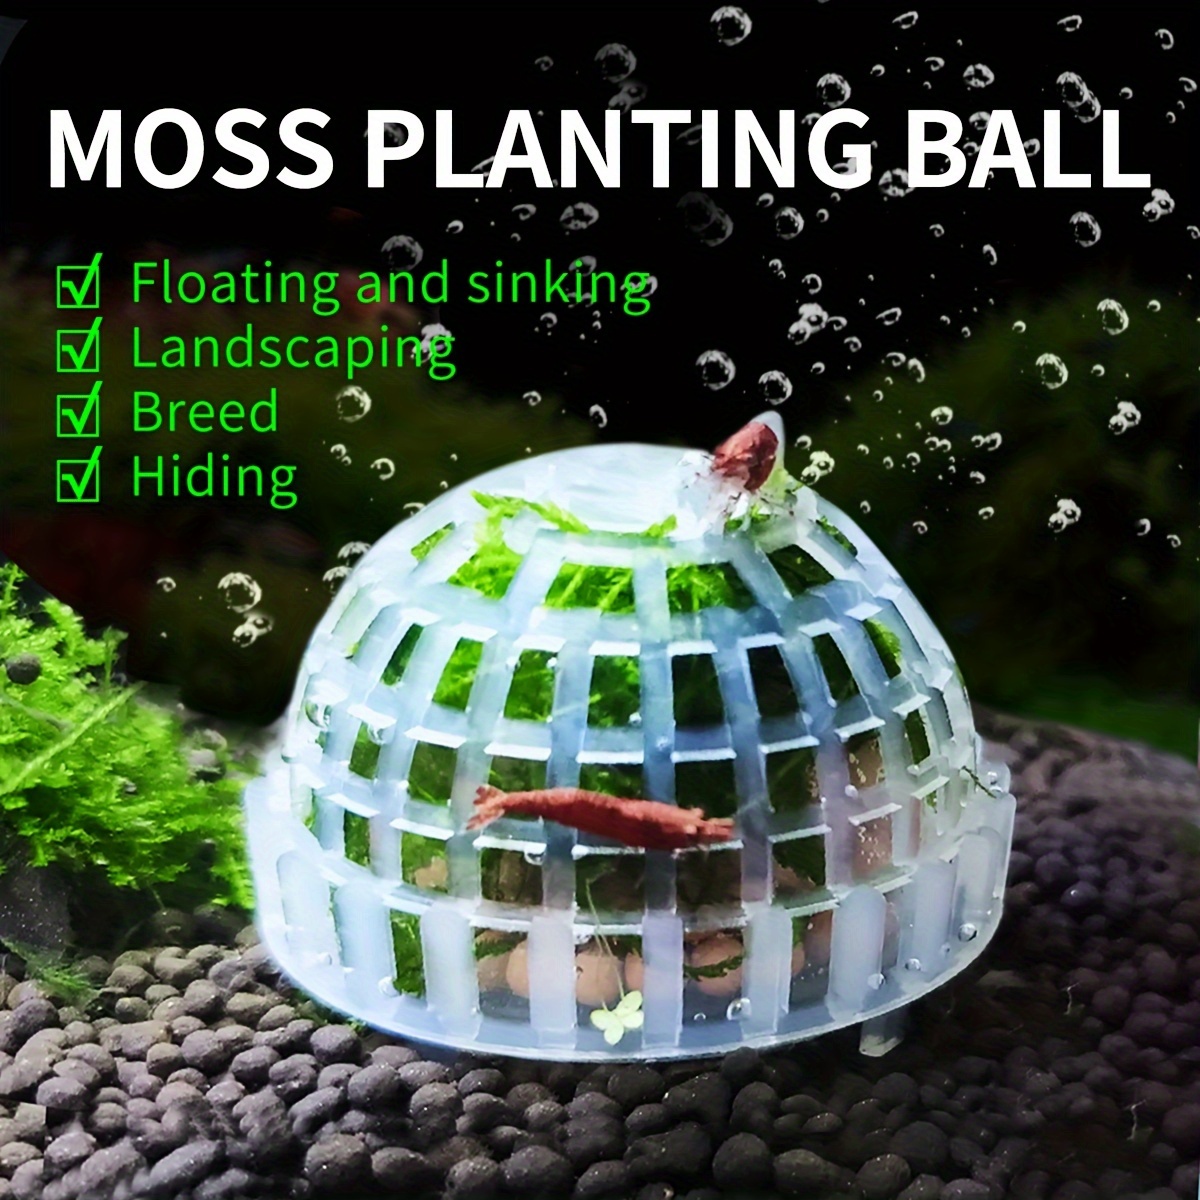 

Silicone Moss Ball Holder For Aquariums - 1pc, Enhances Water Quality & Decor, Ideal For Betta Fish Tanks